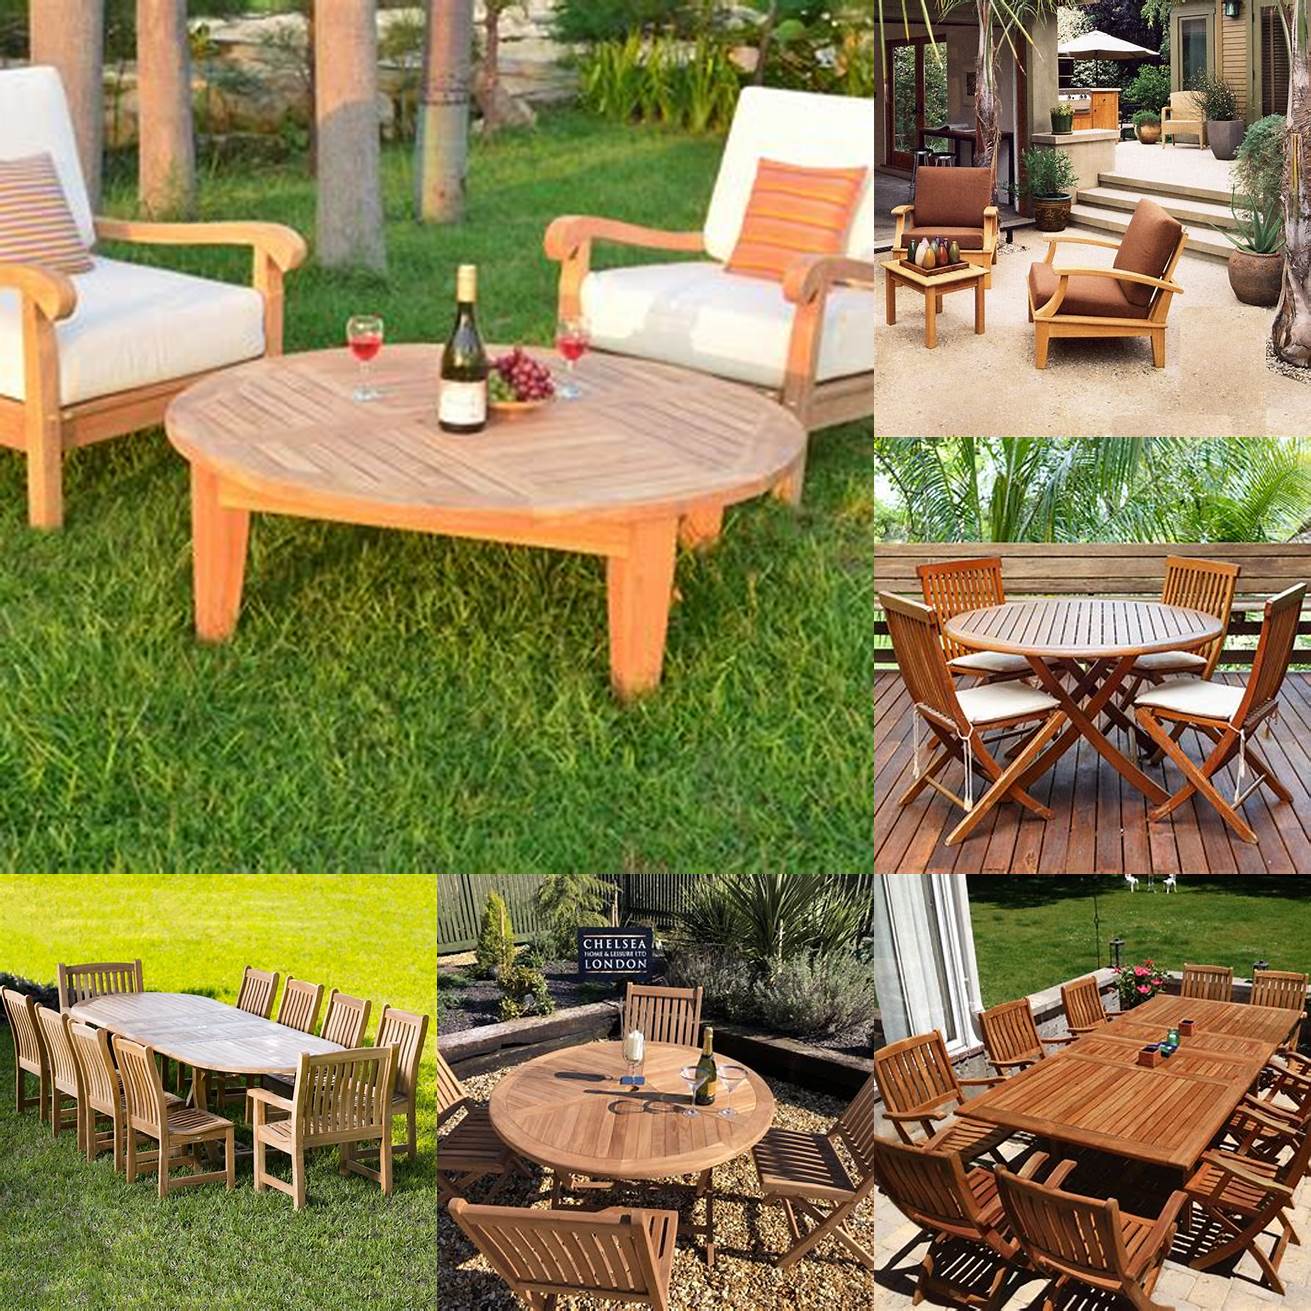 A person using teak furniture in their outdoor space